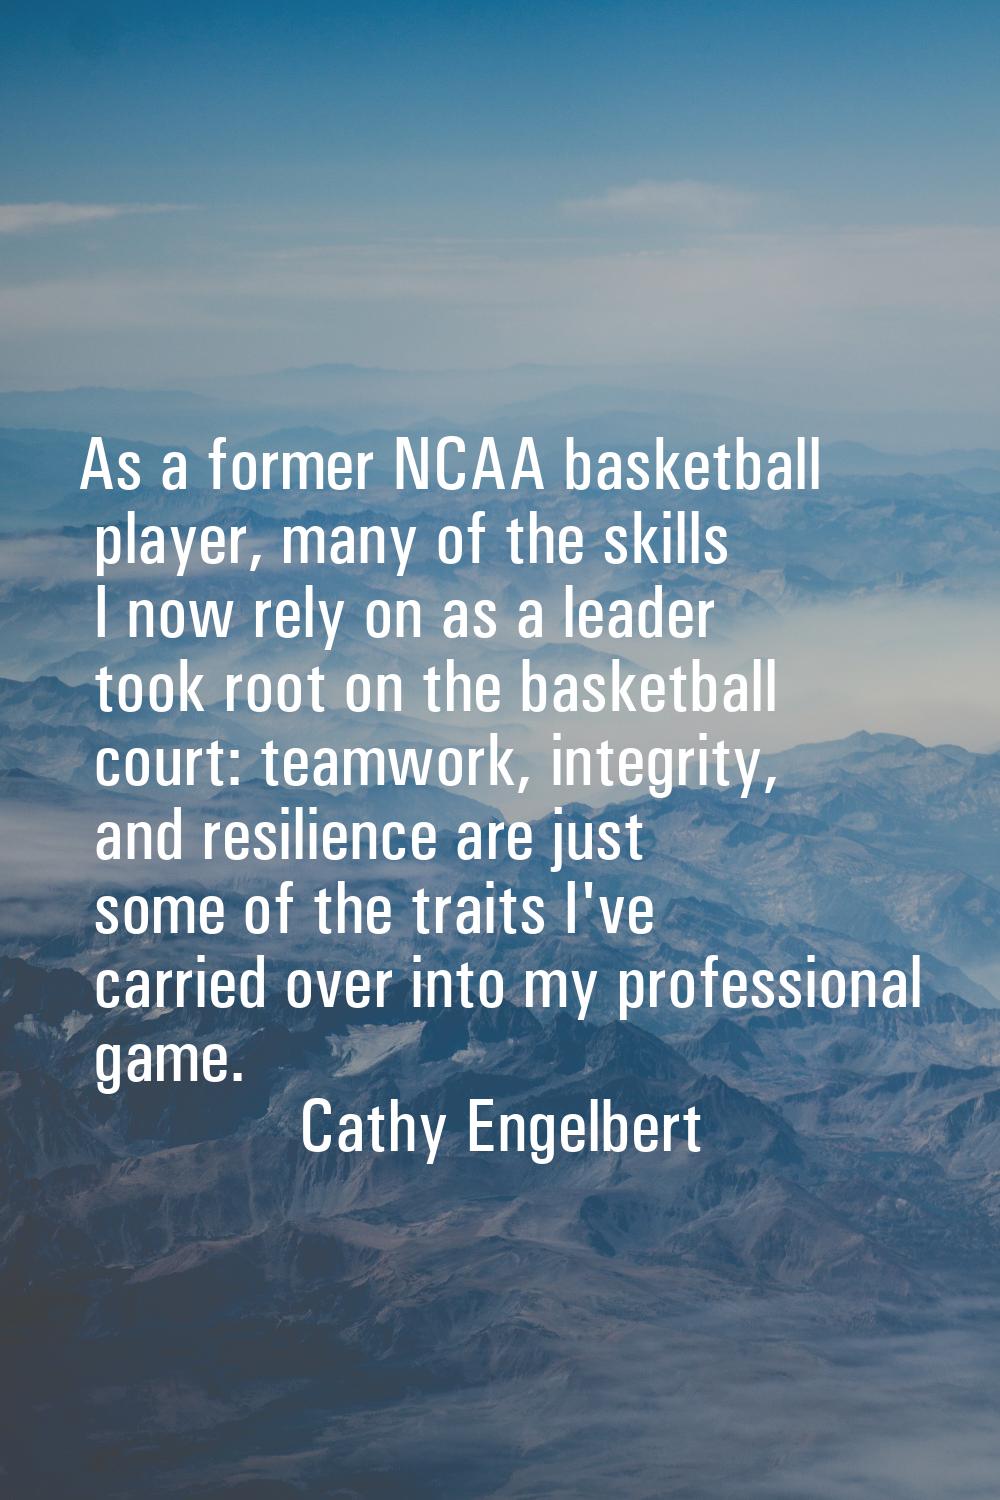 As a former NCAA basketball player, many of the skills I now rely on as a leader took root on the b